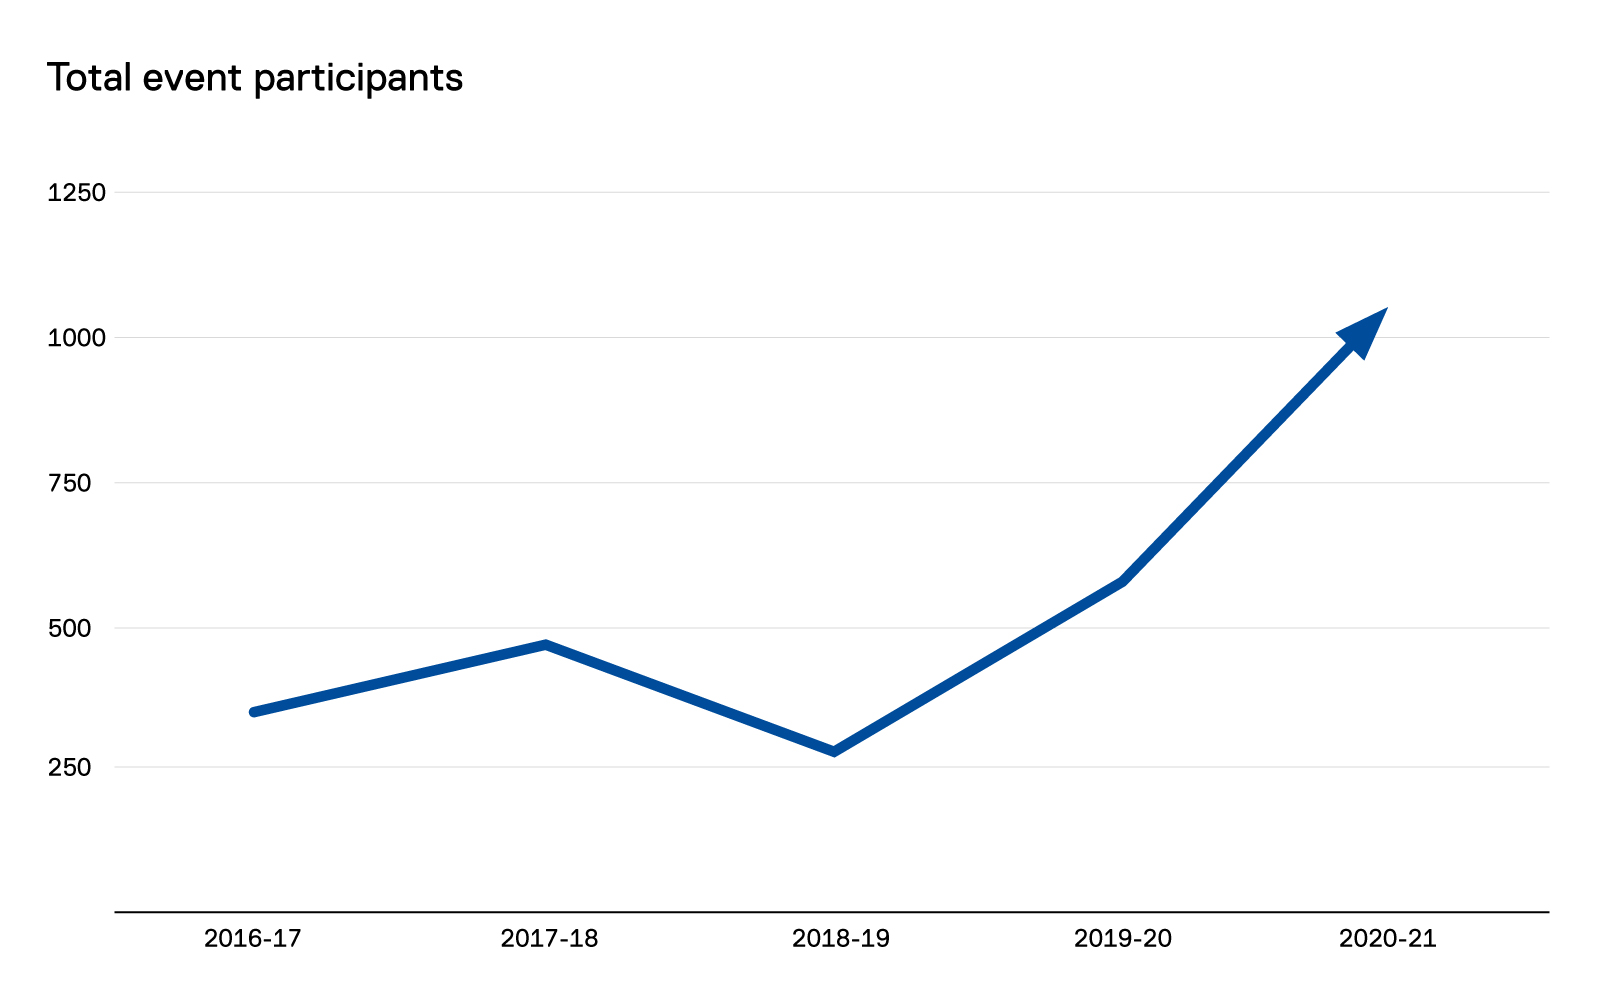 Total event participants trend chart. Number of participants increased significantly from 352 in 2016-17 to 1,053 in 2020-21.